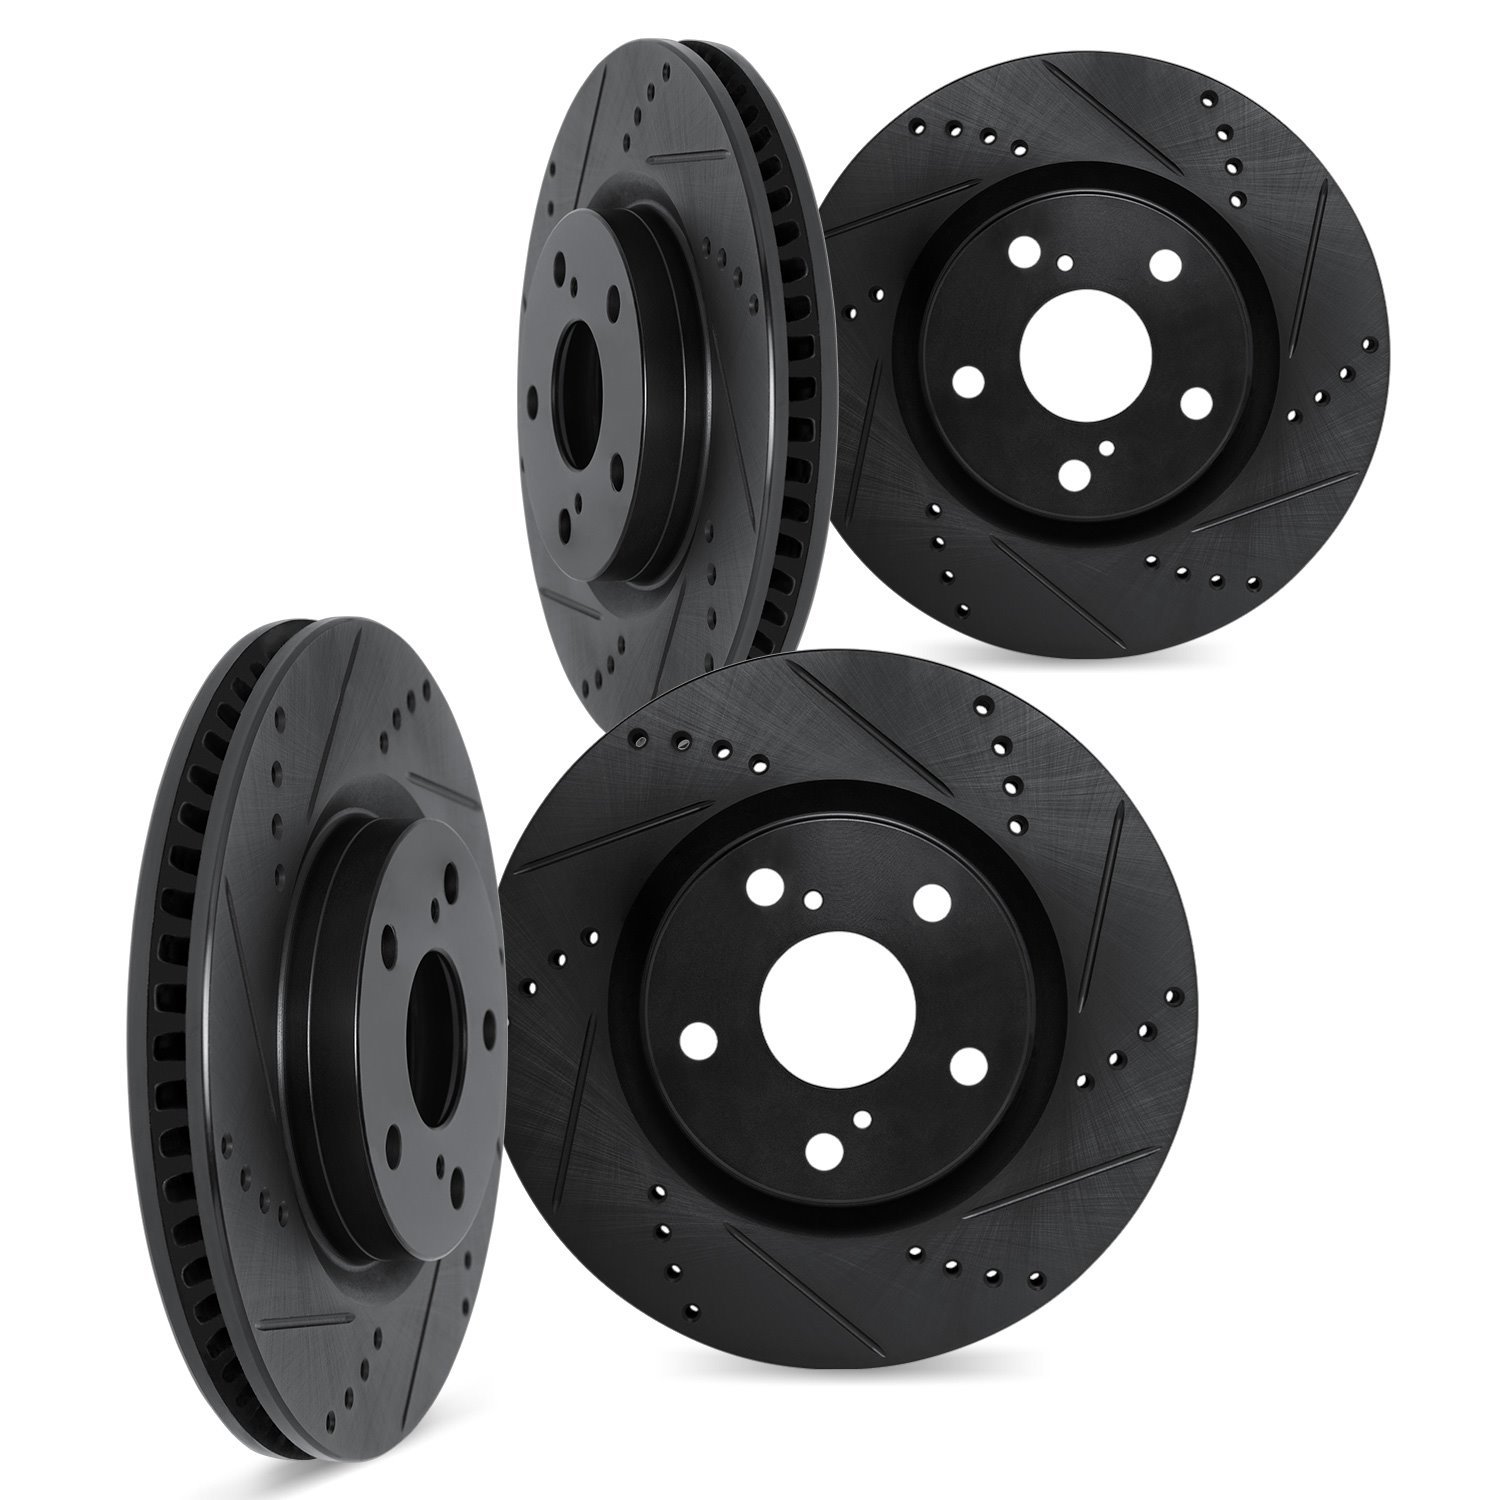 8004-02012 Drilled/Slotted Brake Rotors [Black], 1977-1988 Porsche, Position: Front and Rear